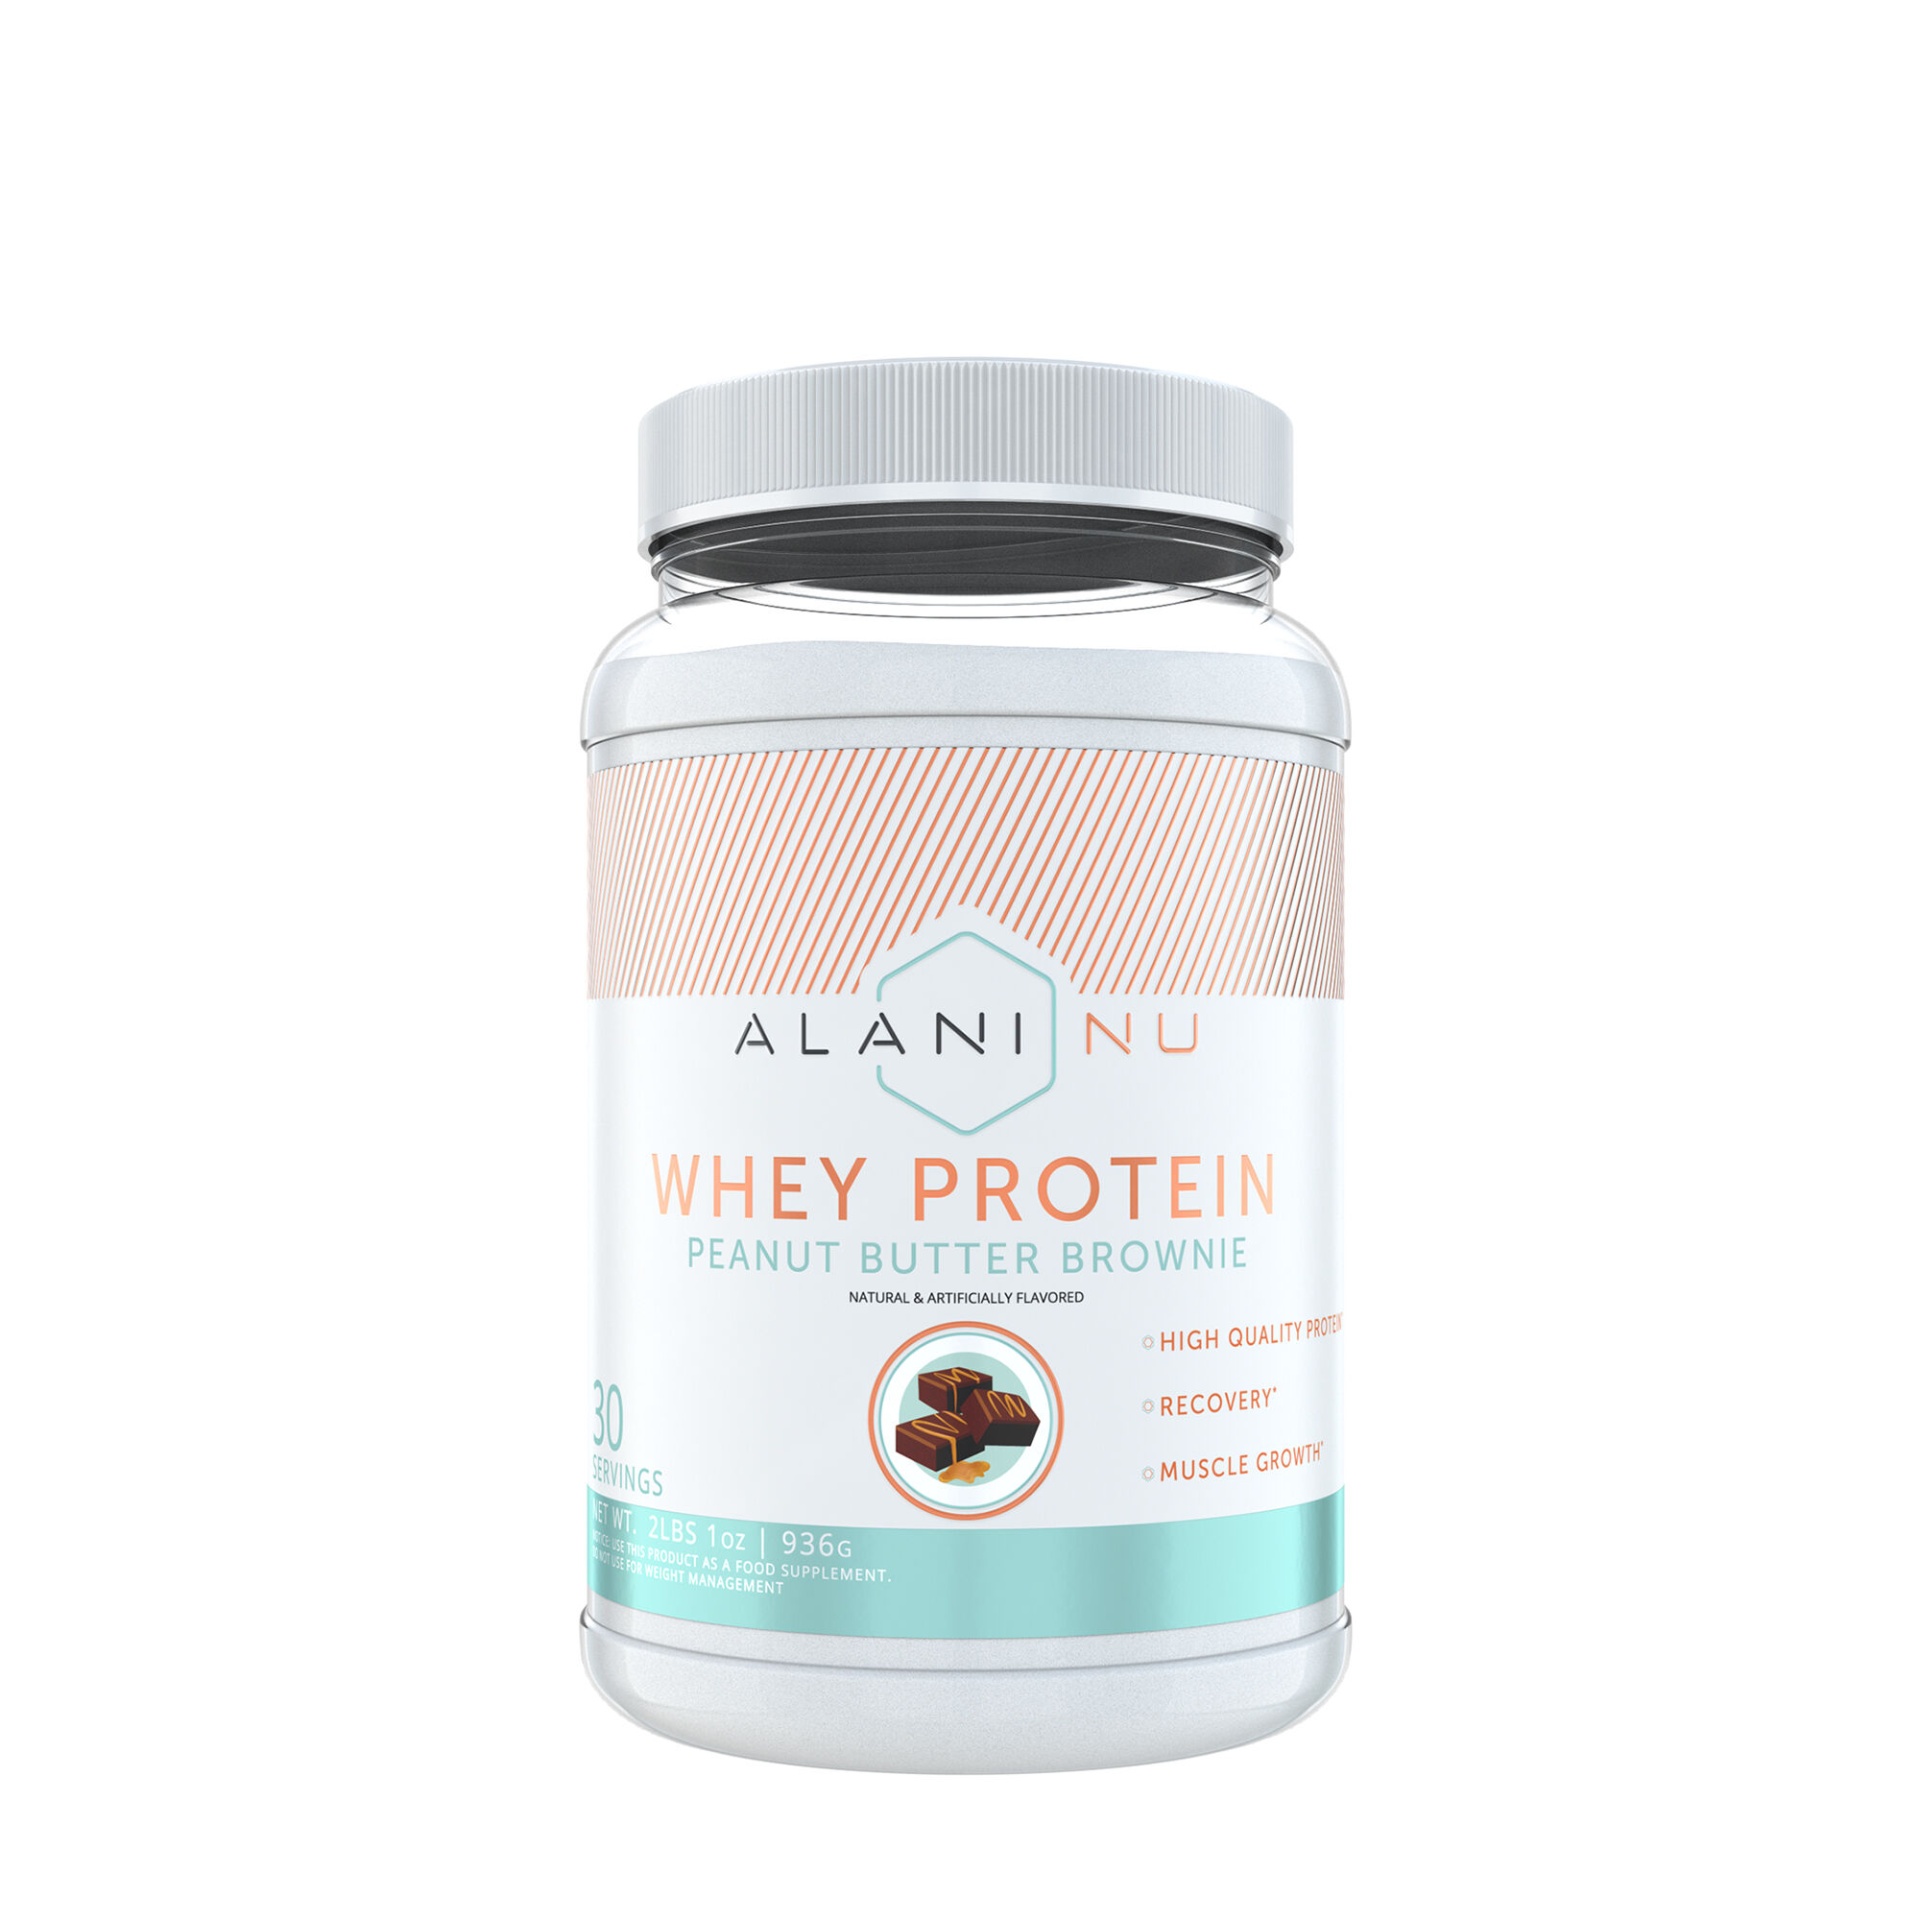 slide 1 of 1, Alani Nu Whey Protein Powder - Peanut Butter Brownie, 1 ct